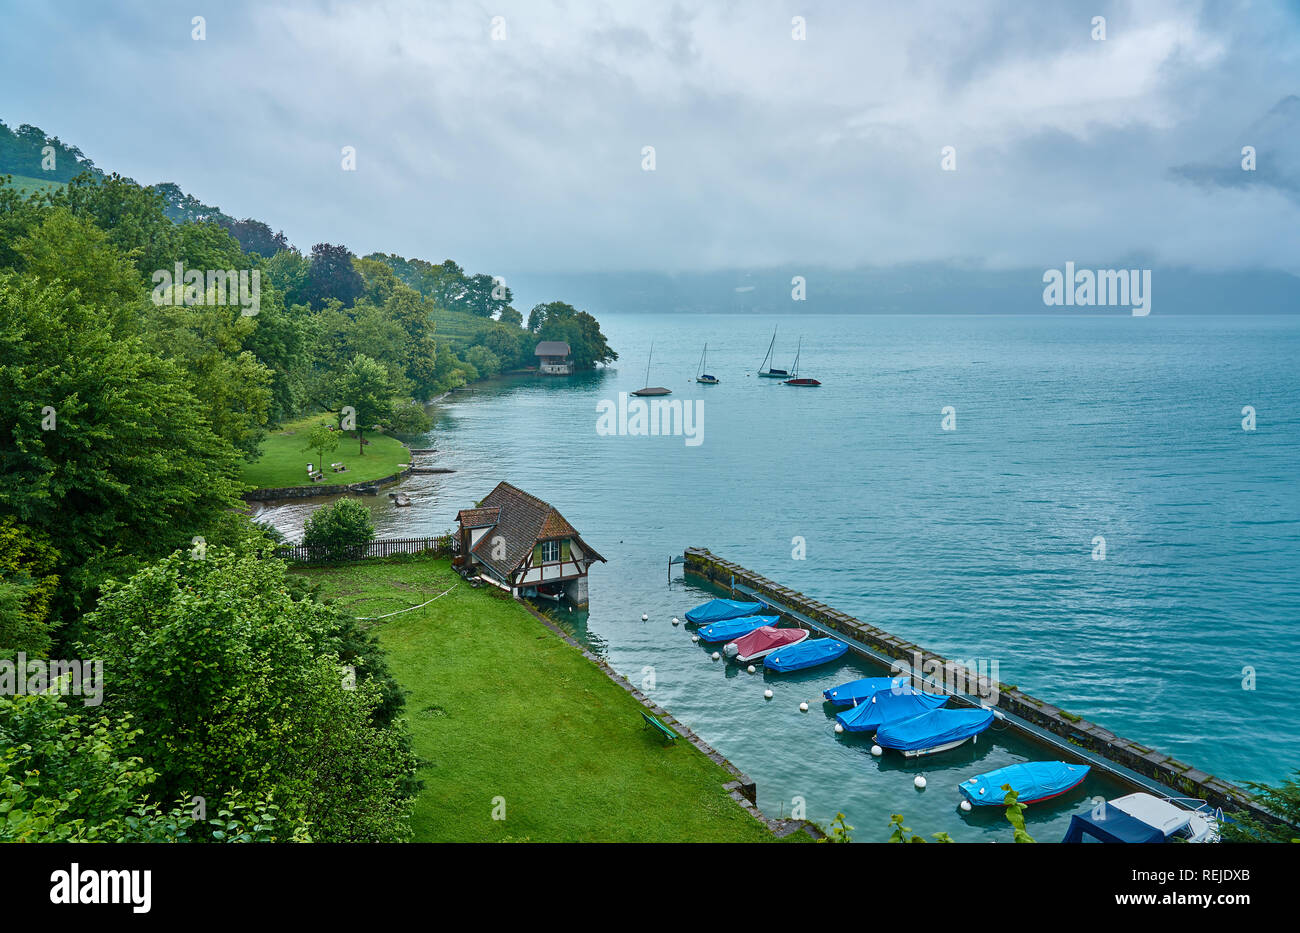 Landscape of Thun Lake on a rainy and foggy day. Taken in Spiez, Swiss Alps, Switzerland Stock Photo